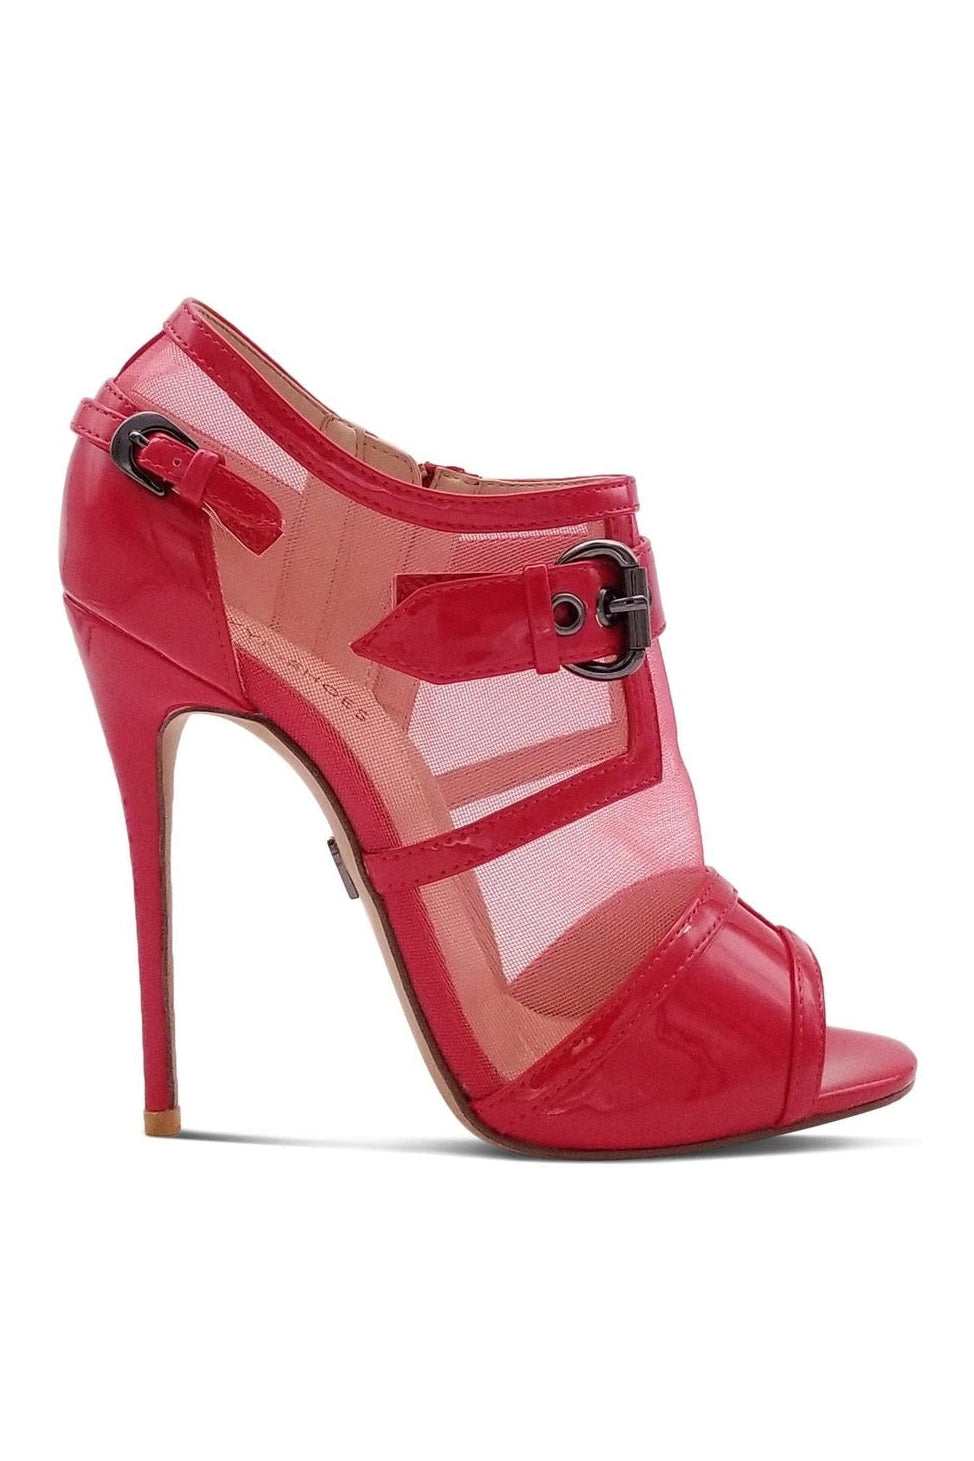 Mesh Open Toe Stiletto Bootie with Buckle-Ankle Boots- Stripper Shoes at SEXYSHOES.COM